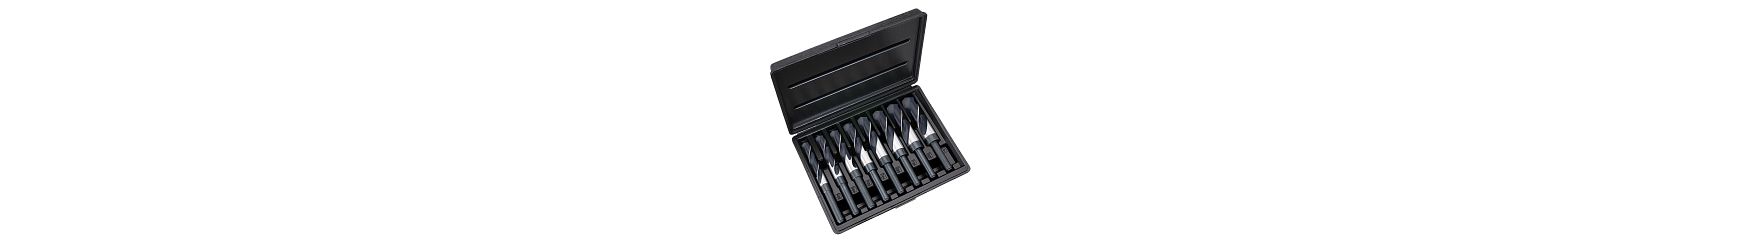 Drill Sets-High Speed Steel-Silver & Deming Sets